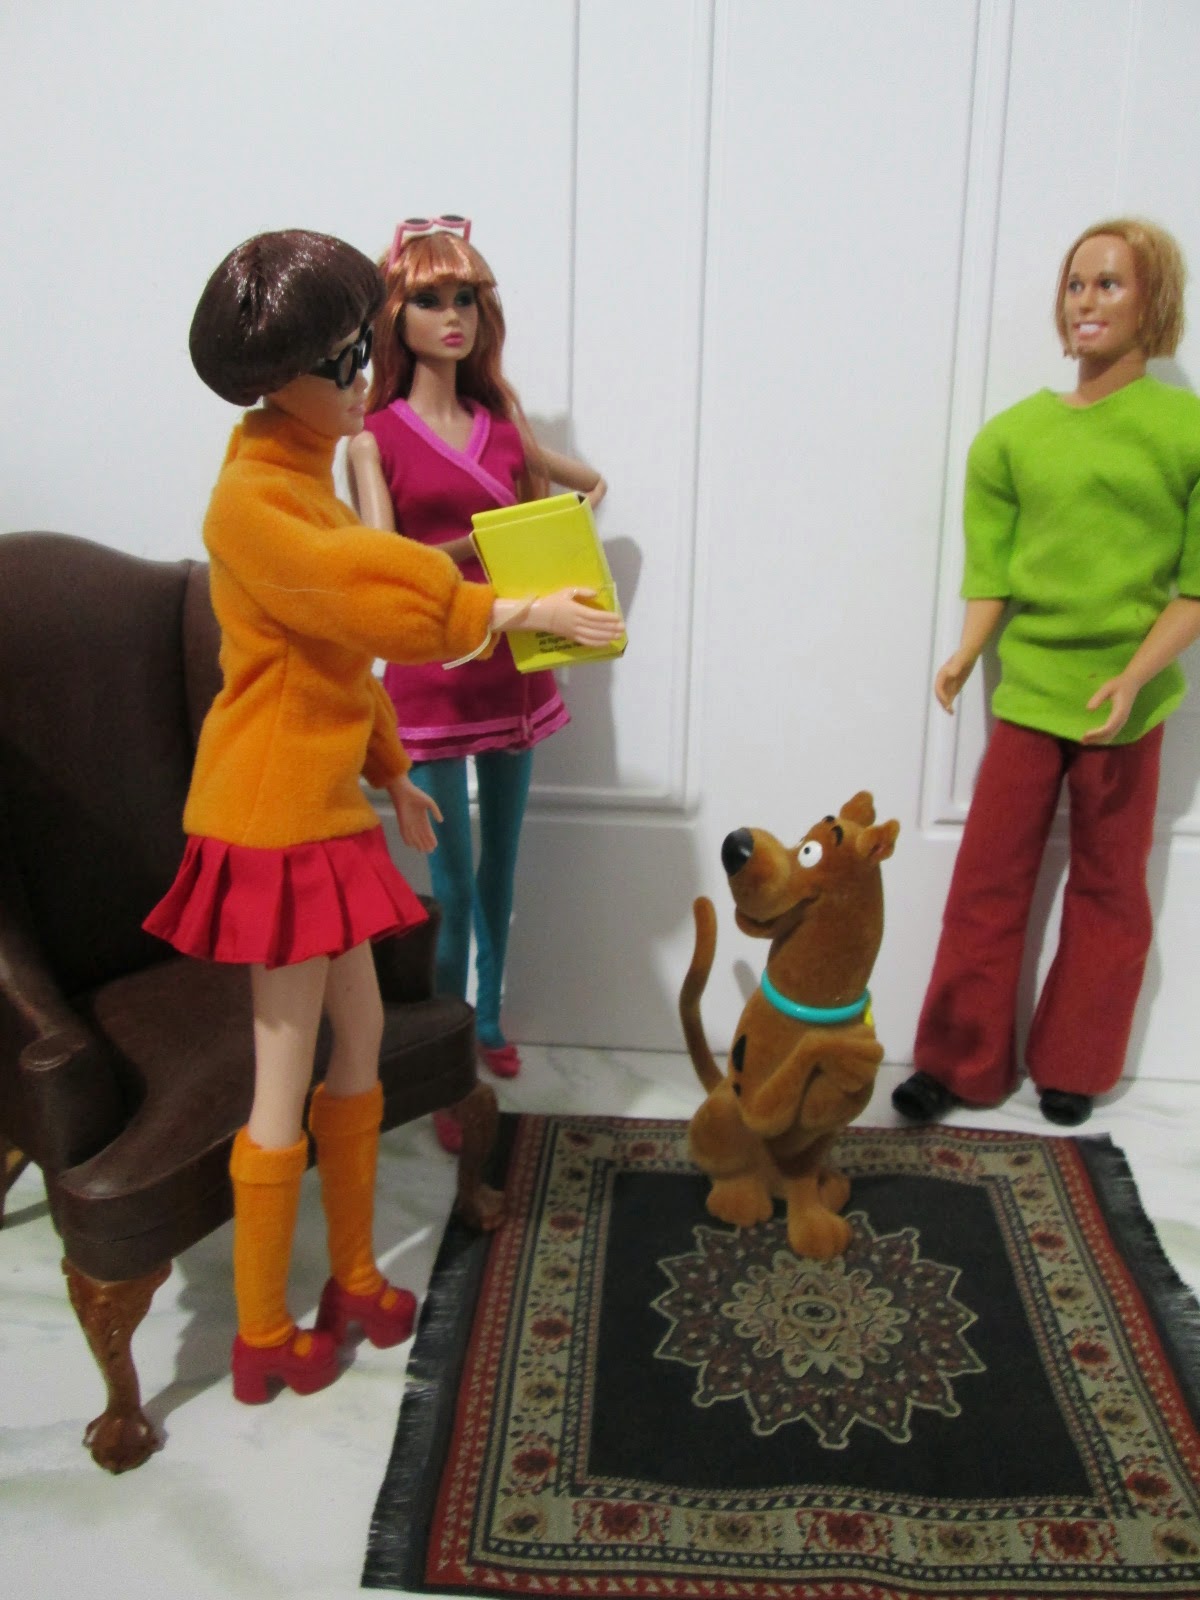 The One Sixth Scale Dollhouse: Scooby-Doo and the Gang!